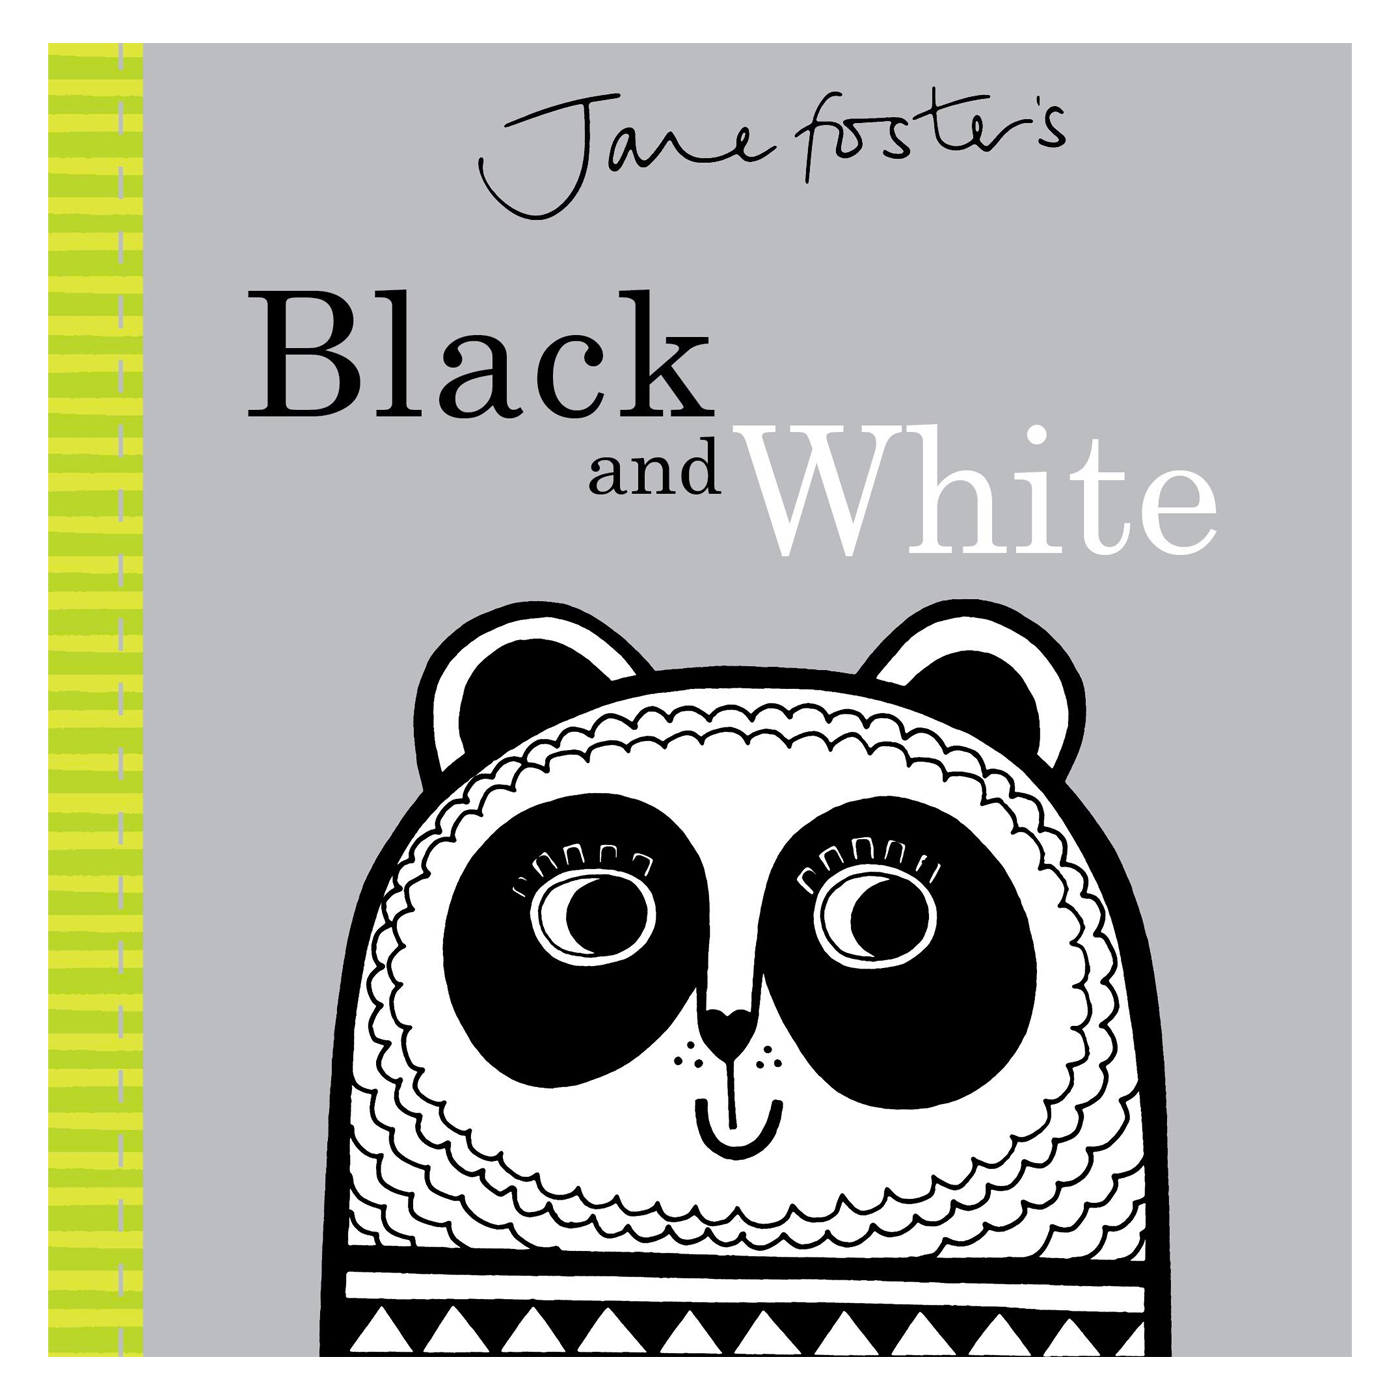  Jane Foster's Black and White